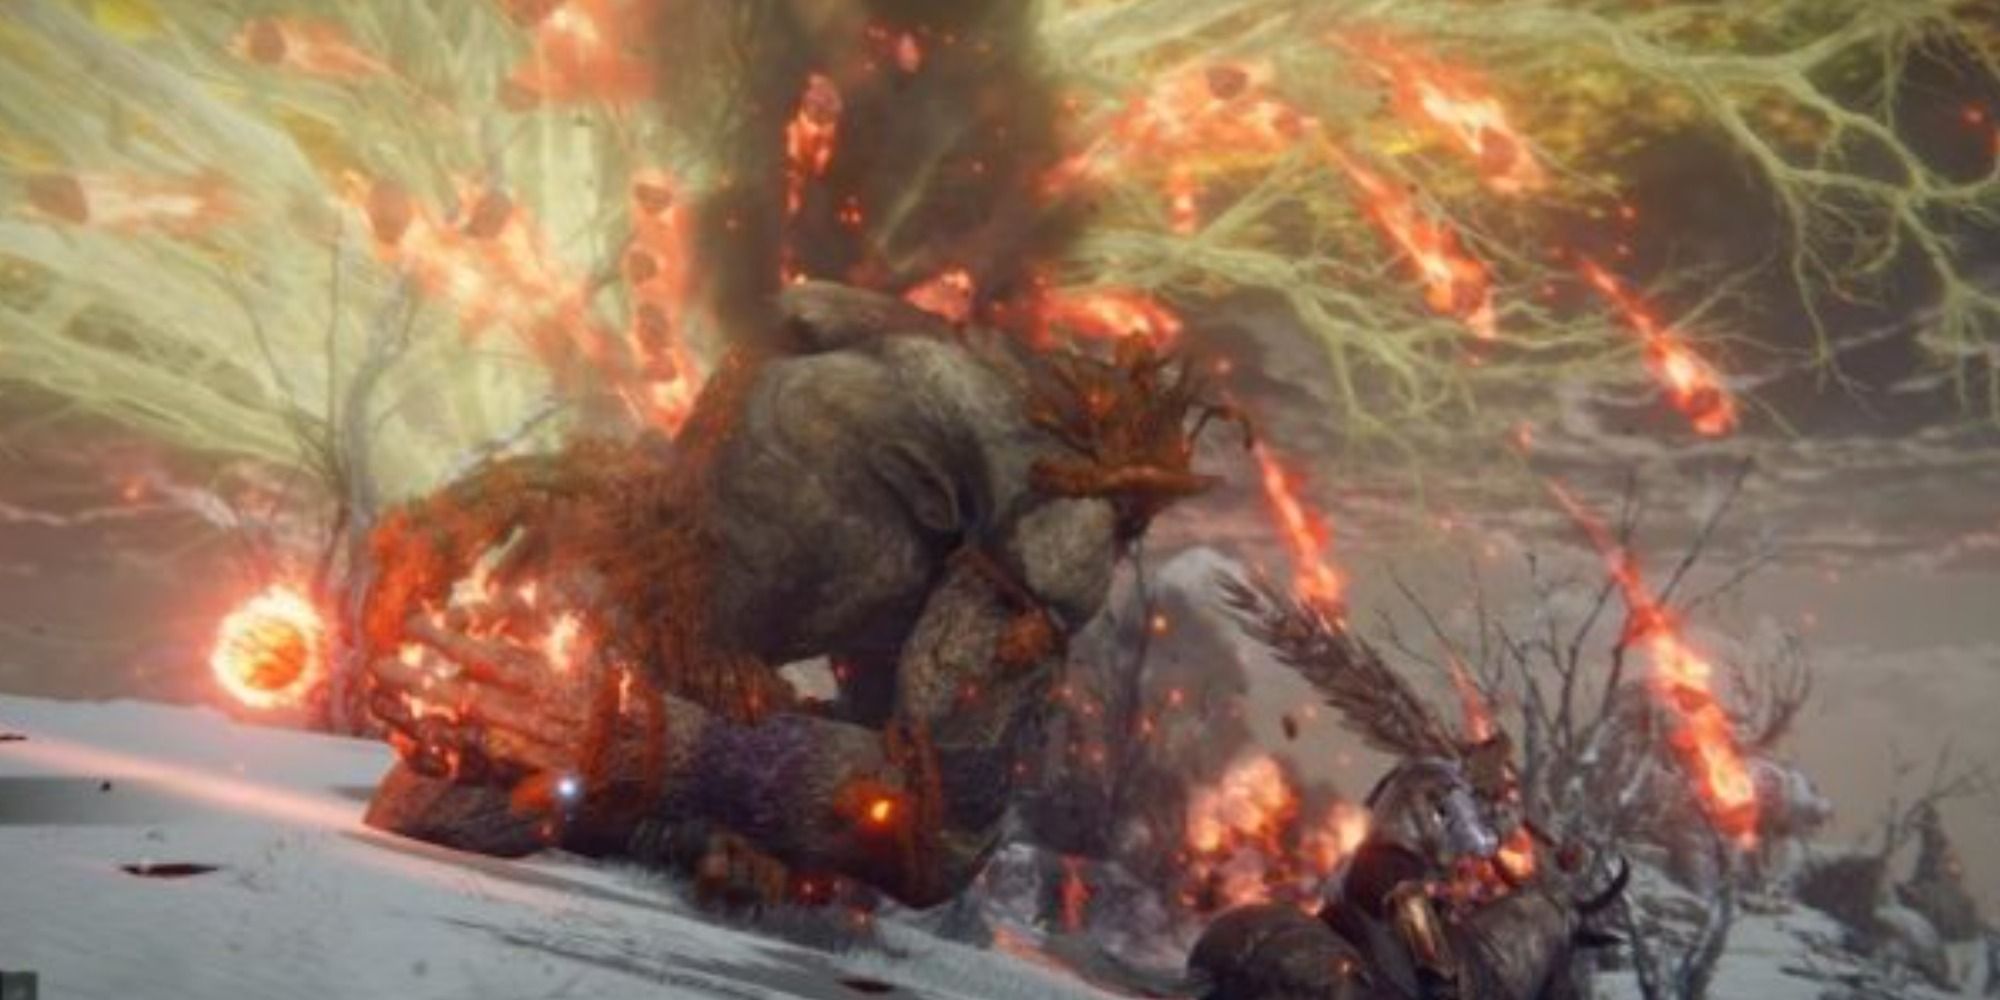 The Fire Giant erupting a fury of molten rocks into the air in Elden Ring